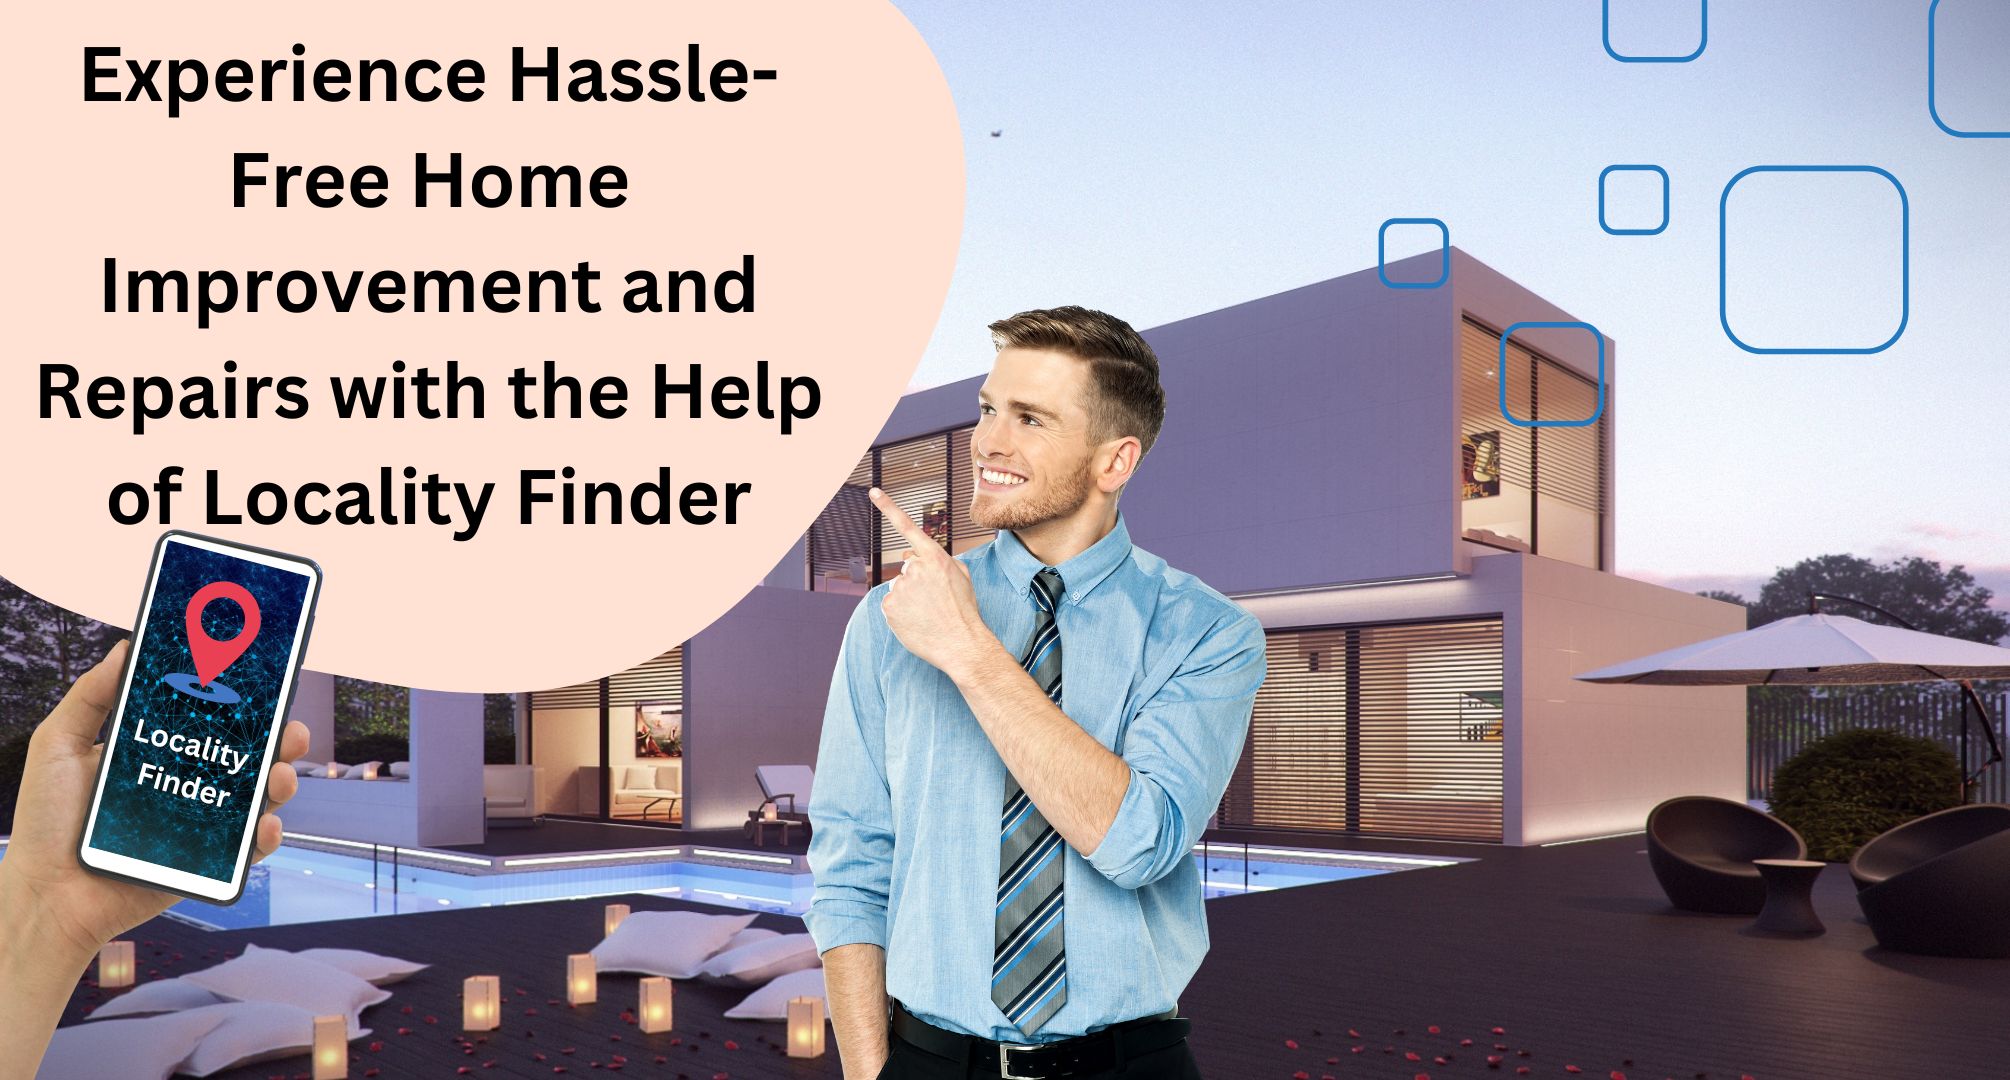 Experience Hassle-Free Home Improvement and Repairs with the Help of Locality Finder